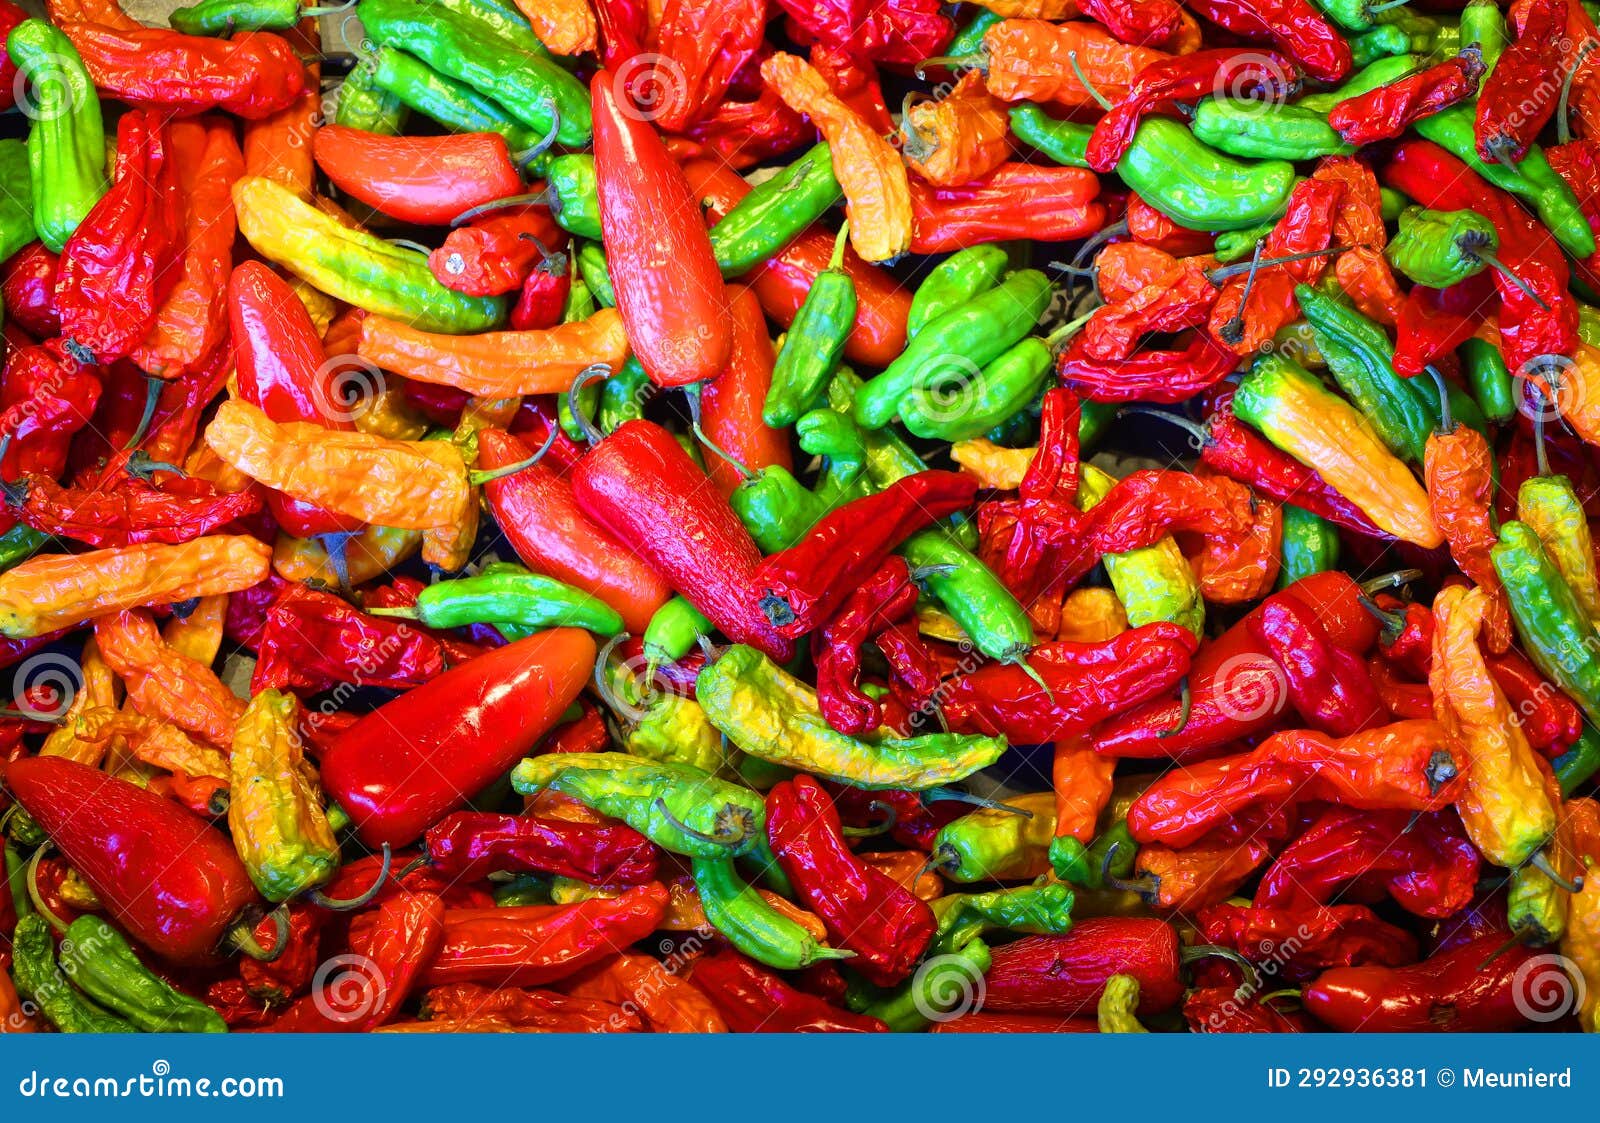 dry peppers: pimientos choriceros, dry hot guindilla peppers,